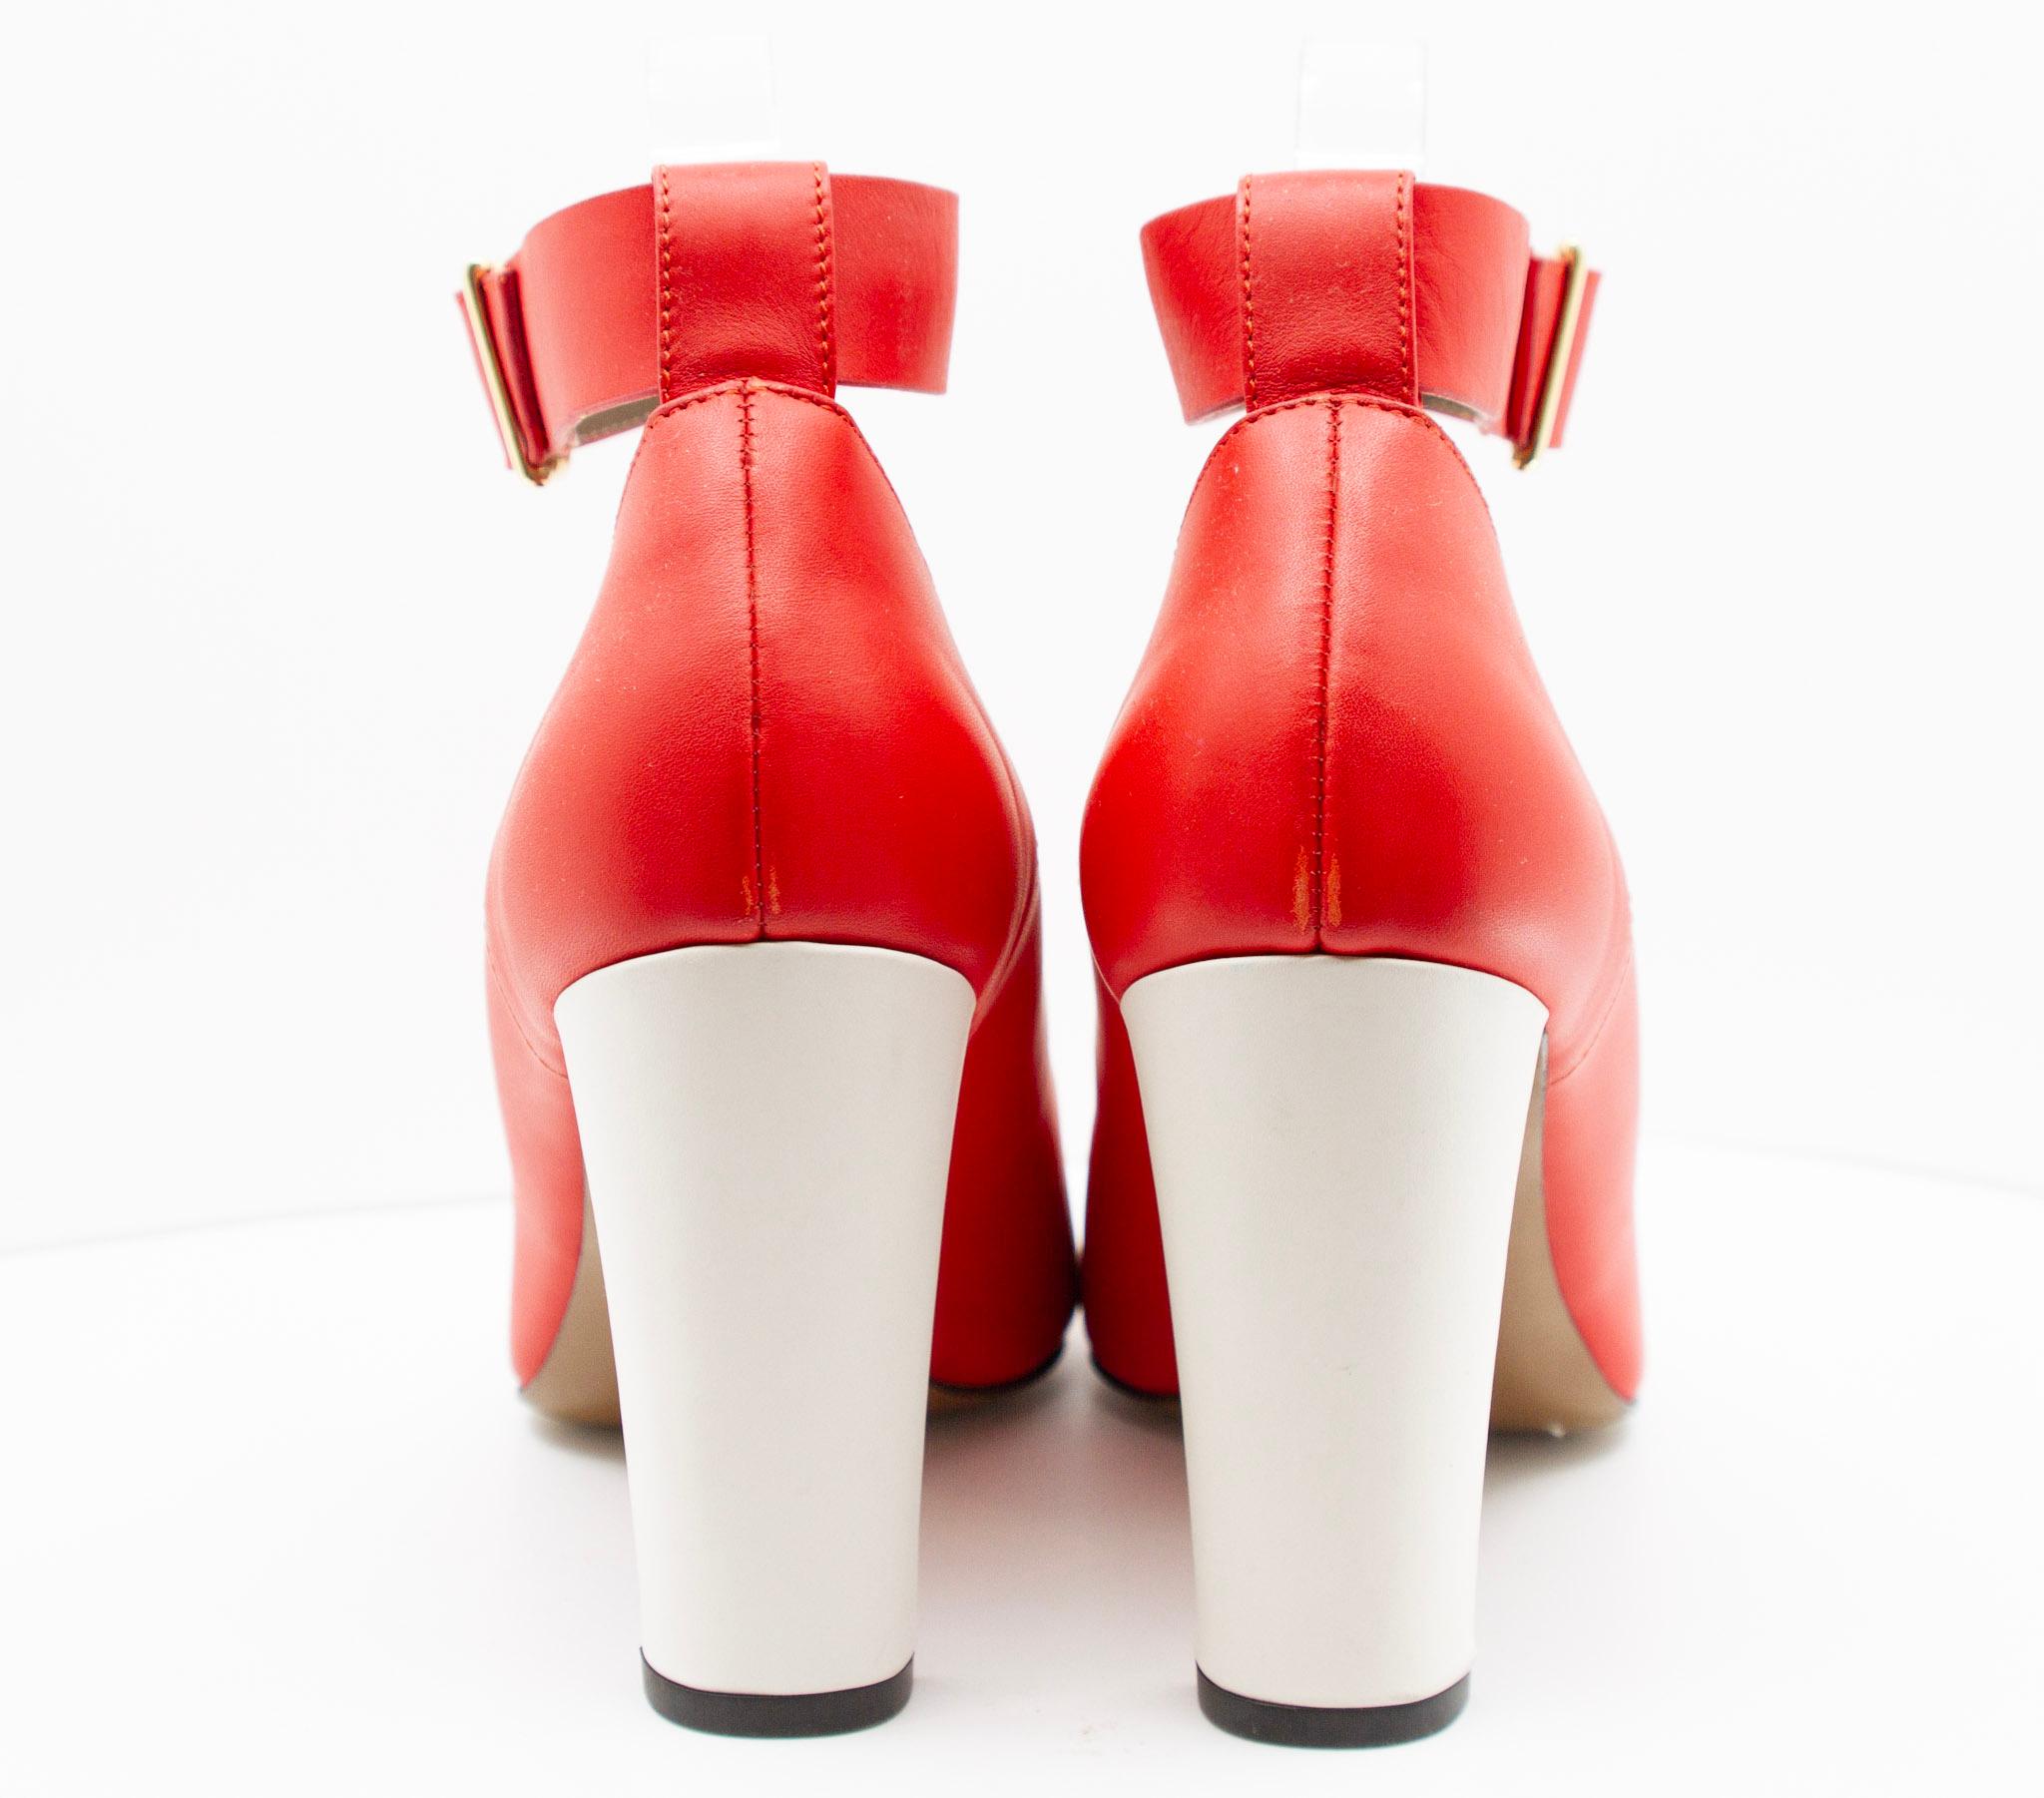 Marni's Cherry Red Pumps In Excellent Condition For Sale In Kingston, NY